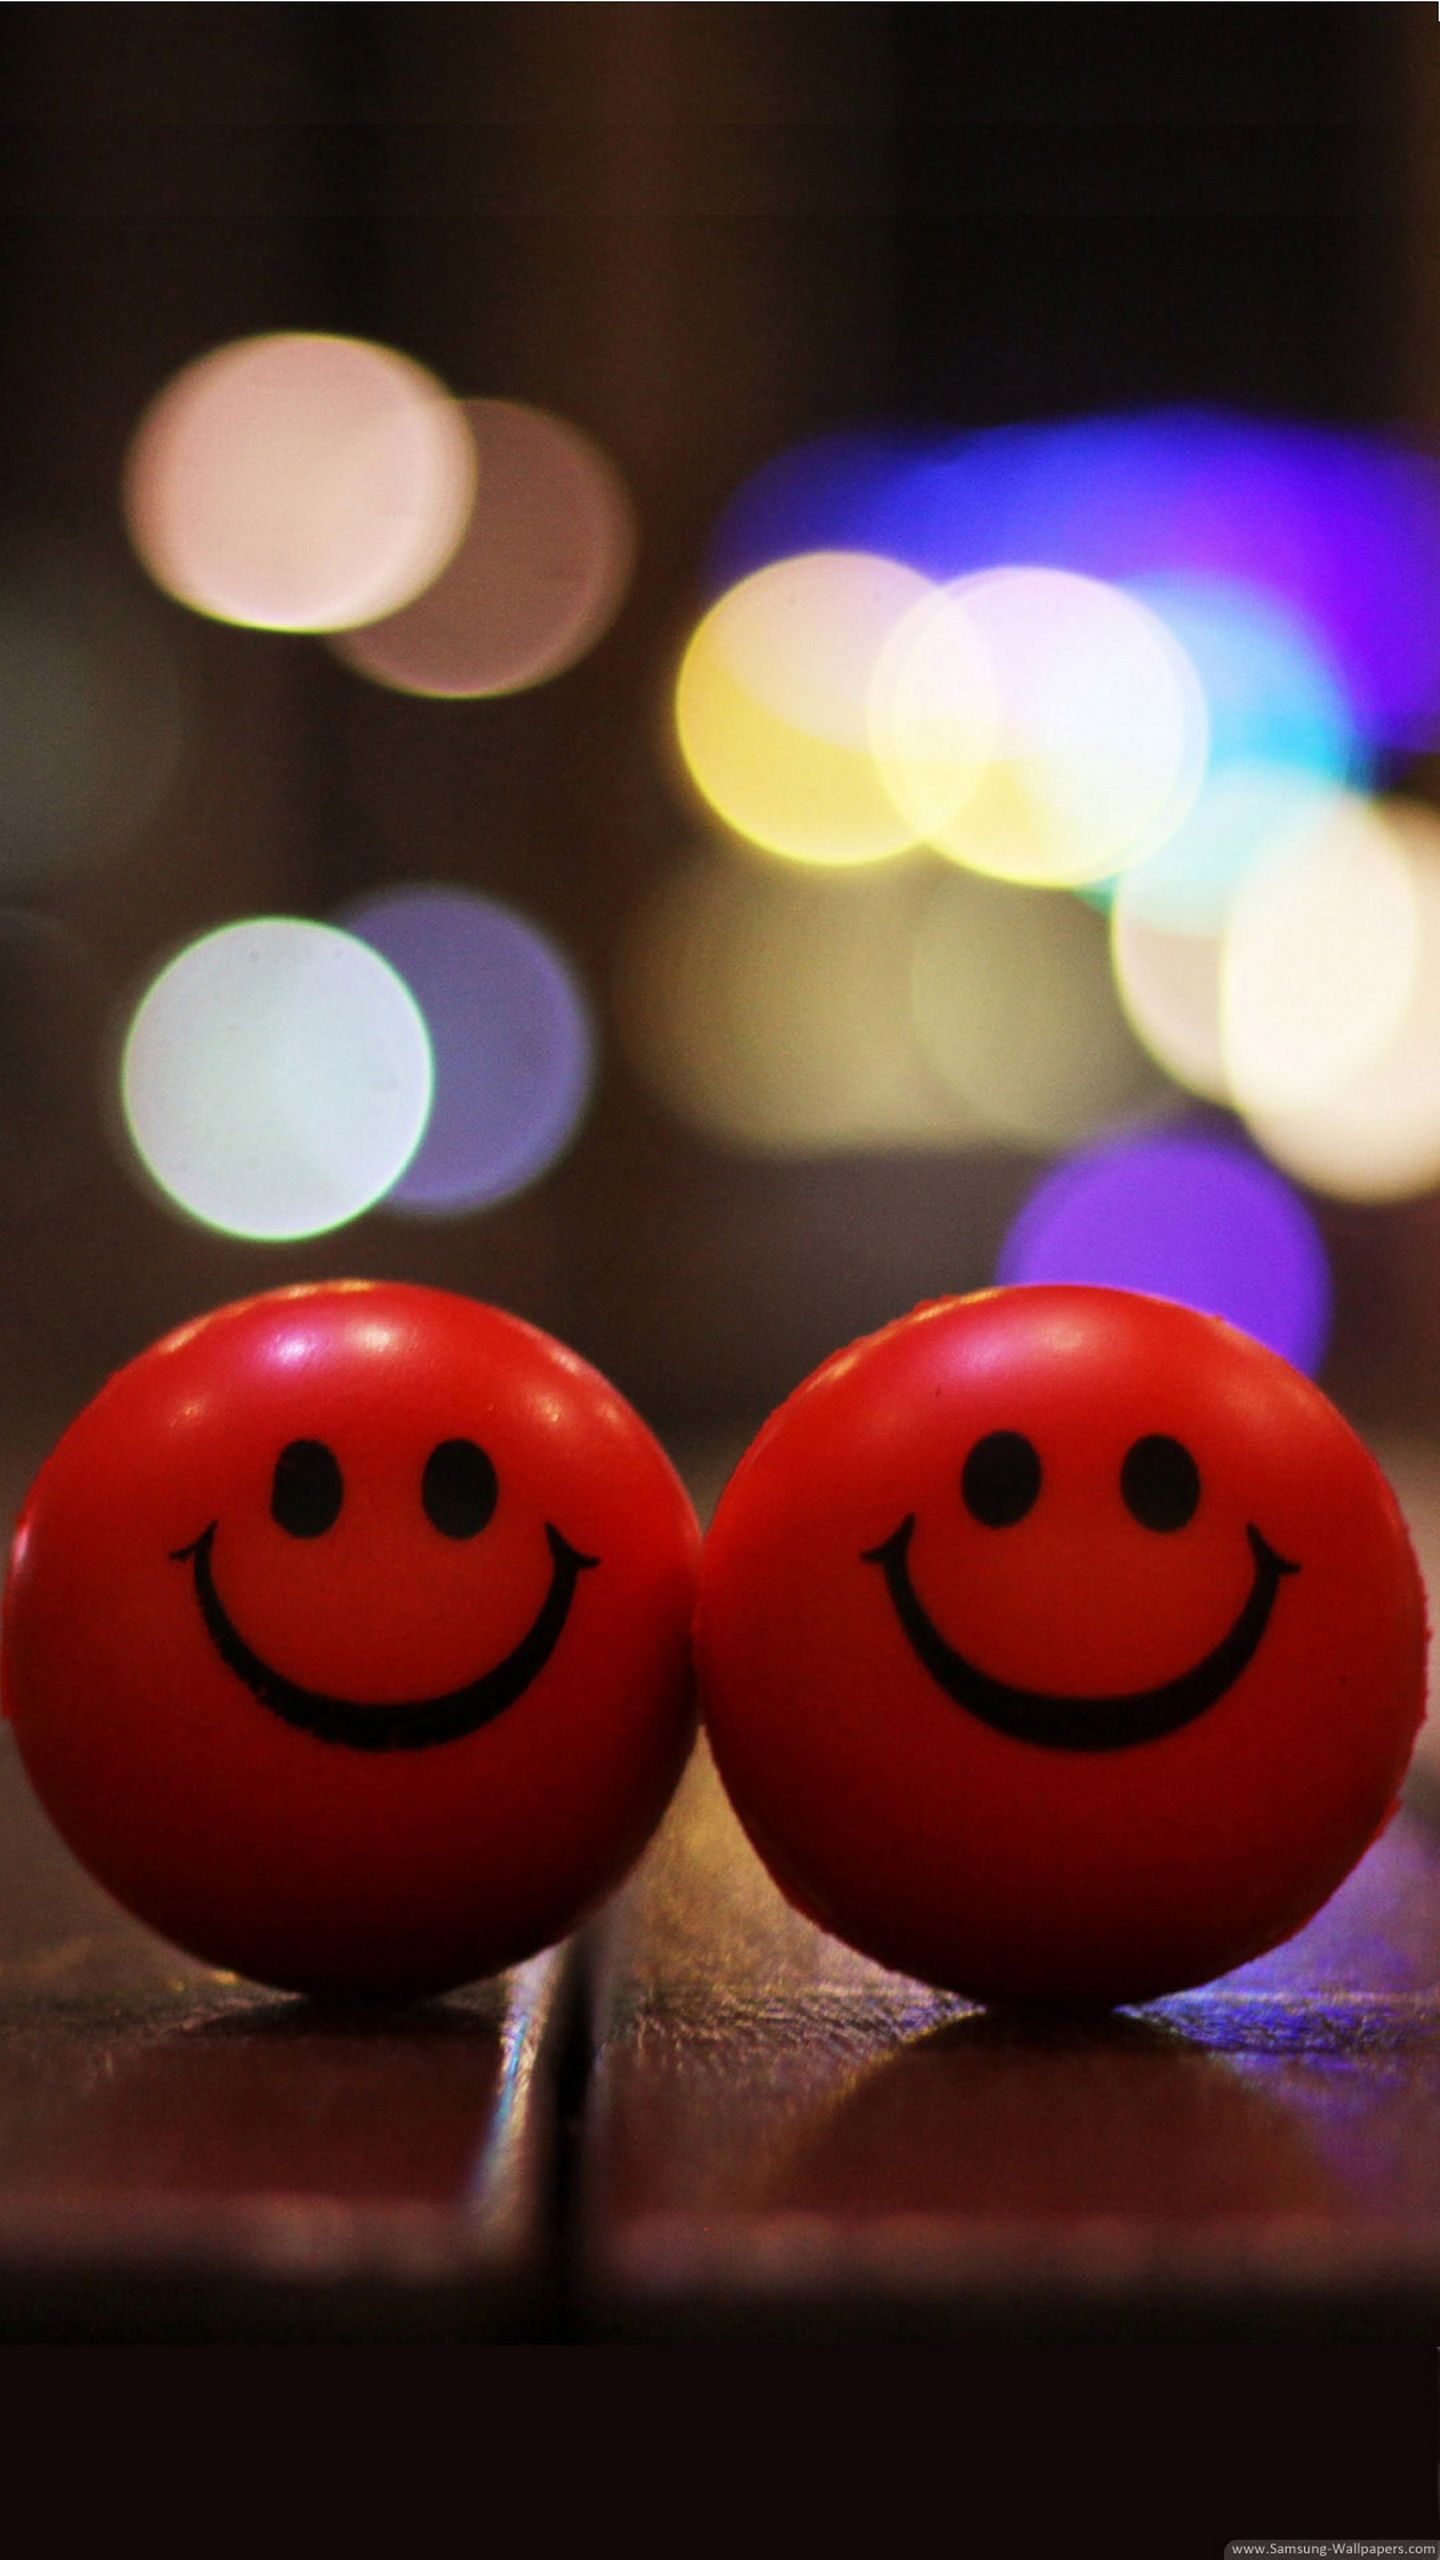 Two Little Red Smiley Balls Wallpaper Smile Cute